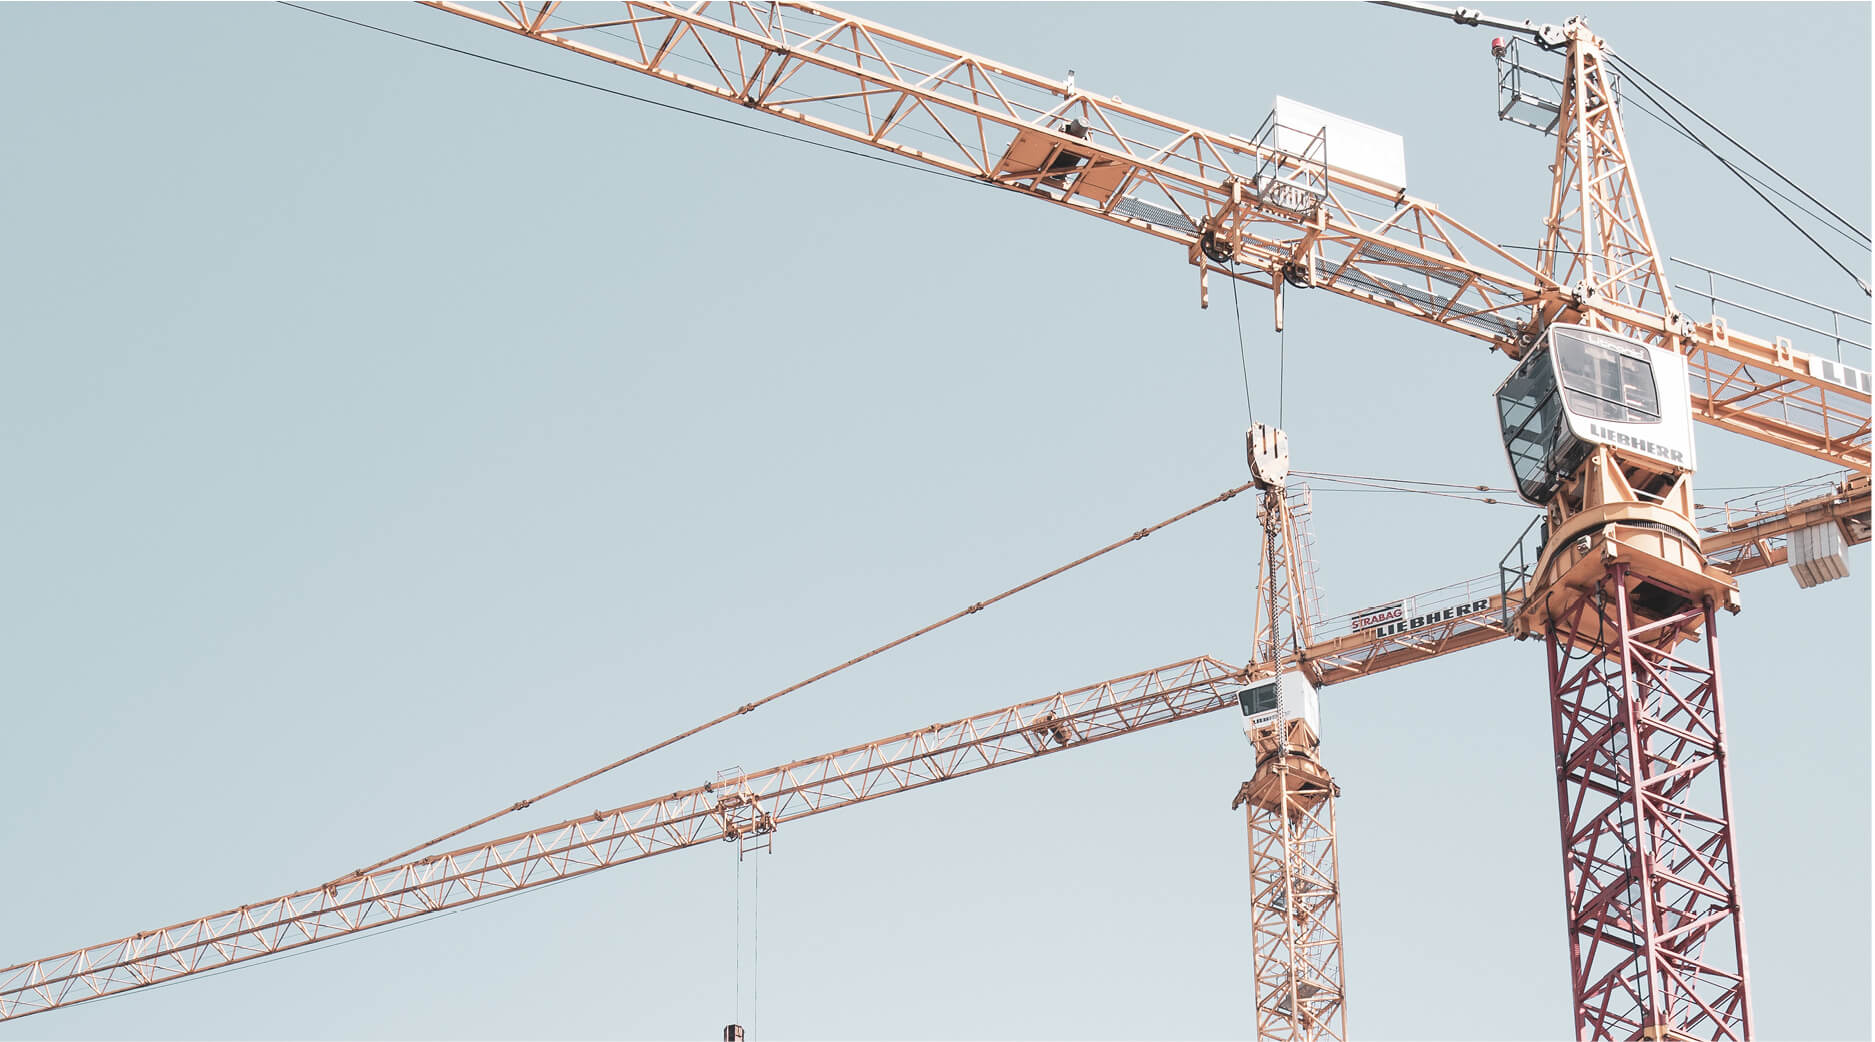 Webinar: Immigration, Sponsorship and the Construction Sector